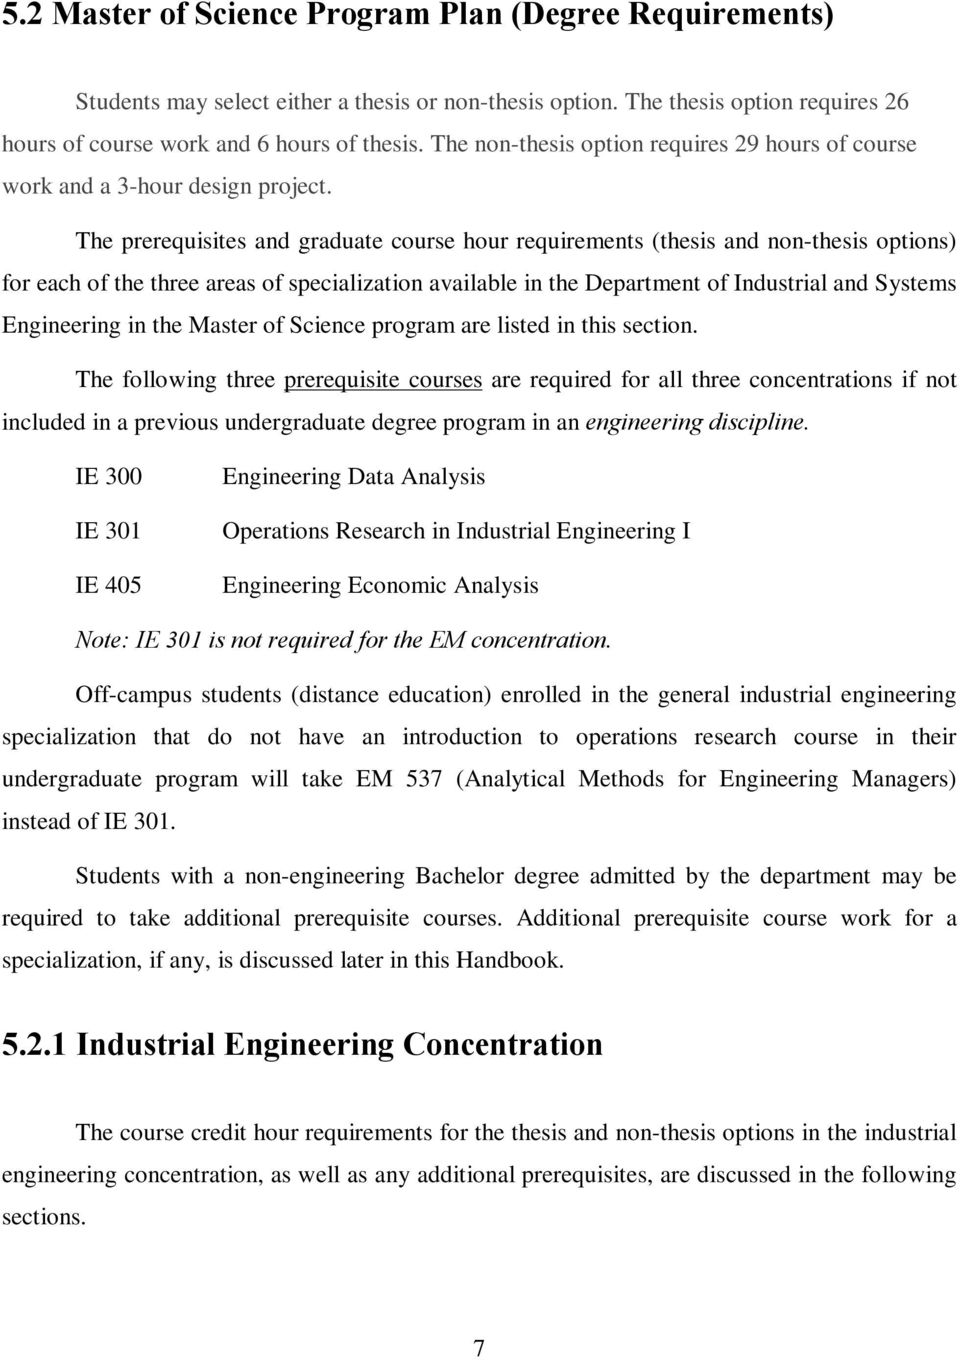 The prerequisites and graduate course hour requirements (thesis and non-thesis options) for each of the three areas of specialization available in the Department of Industrial and Systems Engineering